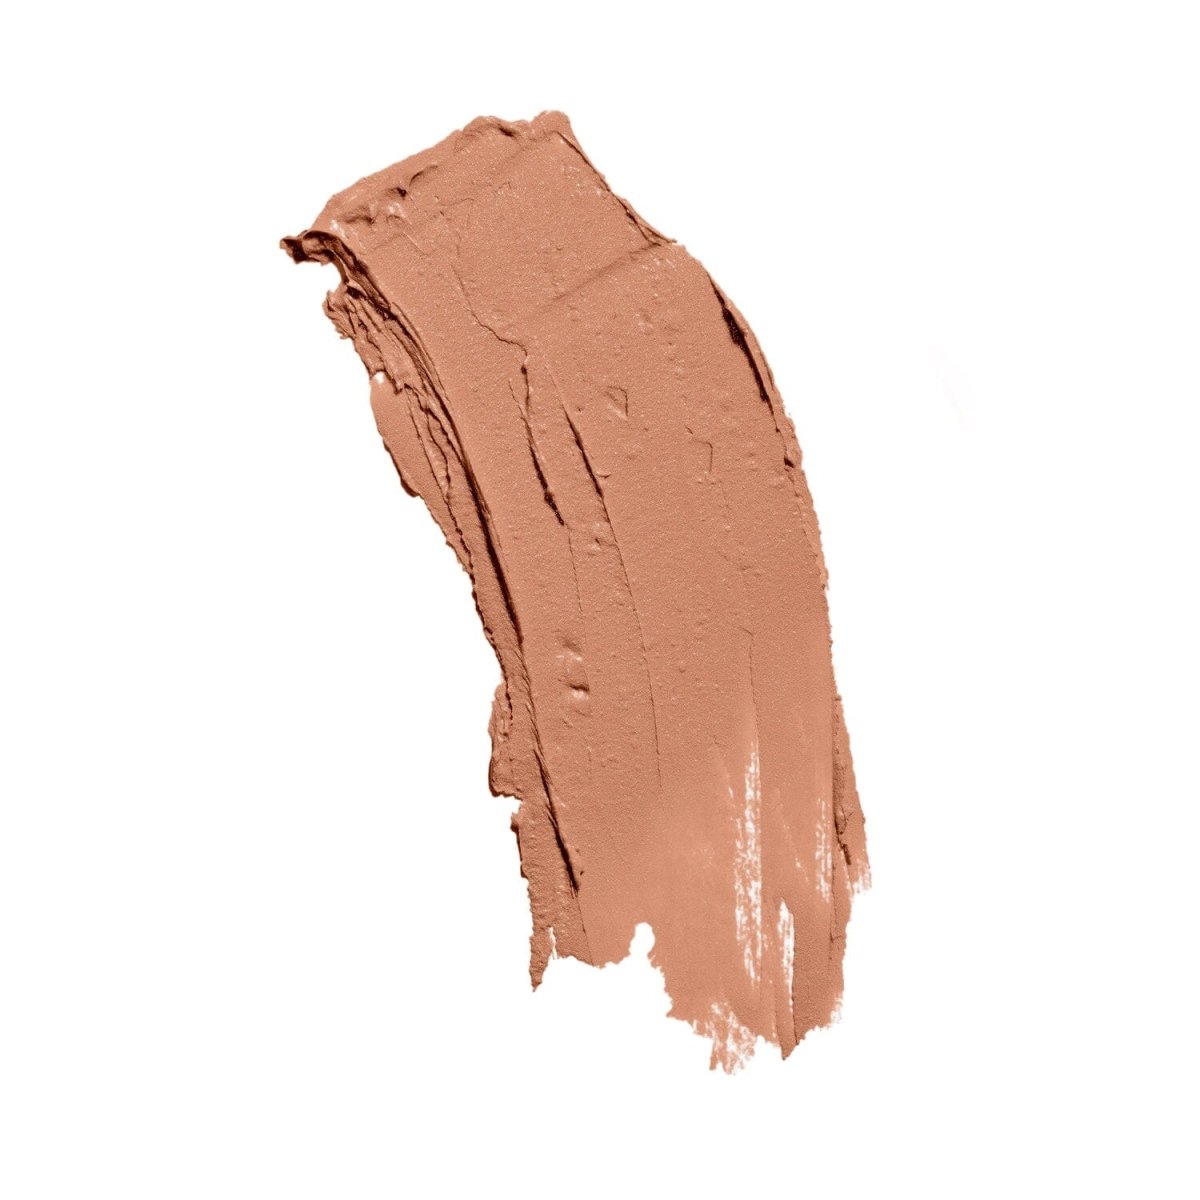 A cruelty-free matte lipstick in natural shade displayed on a white background